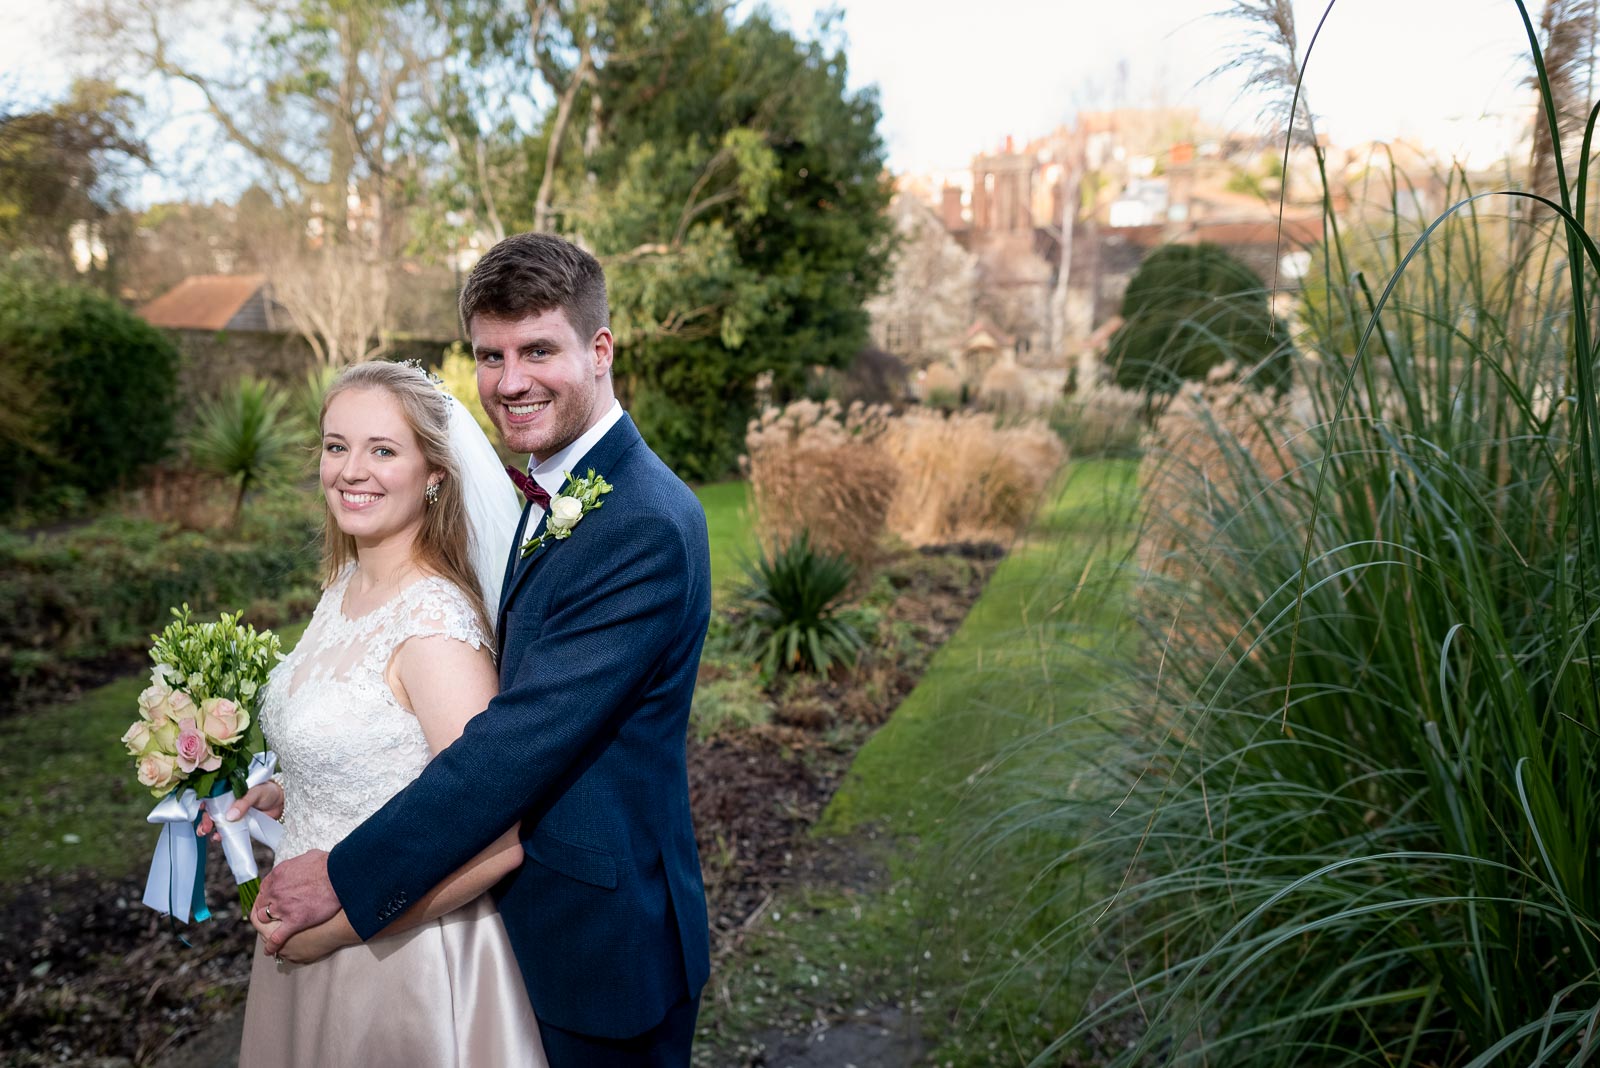 Wedding Photographer for Belinda and Chris at Lewes Registry Office